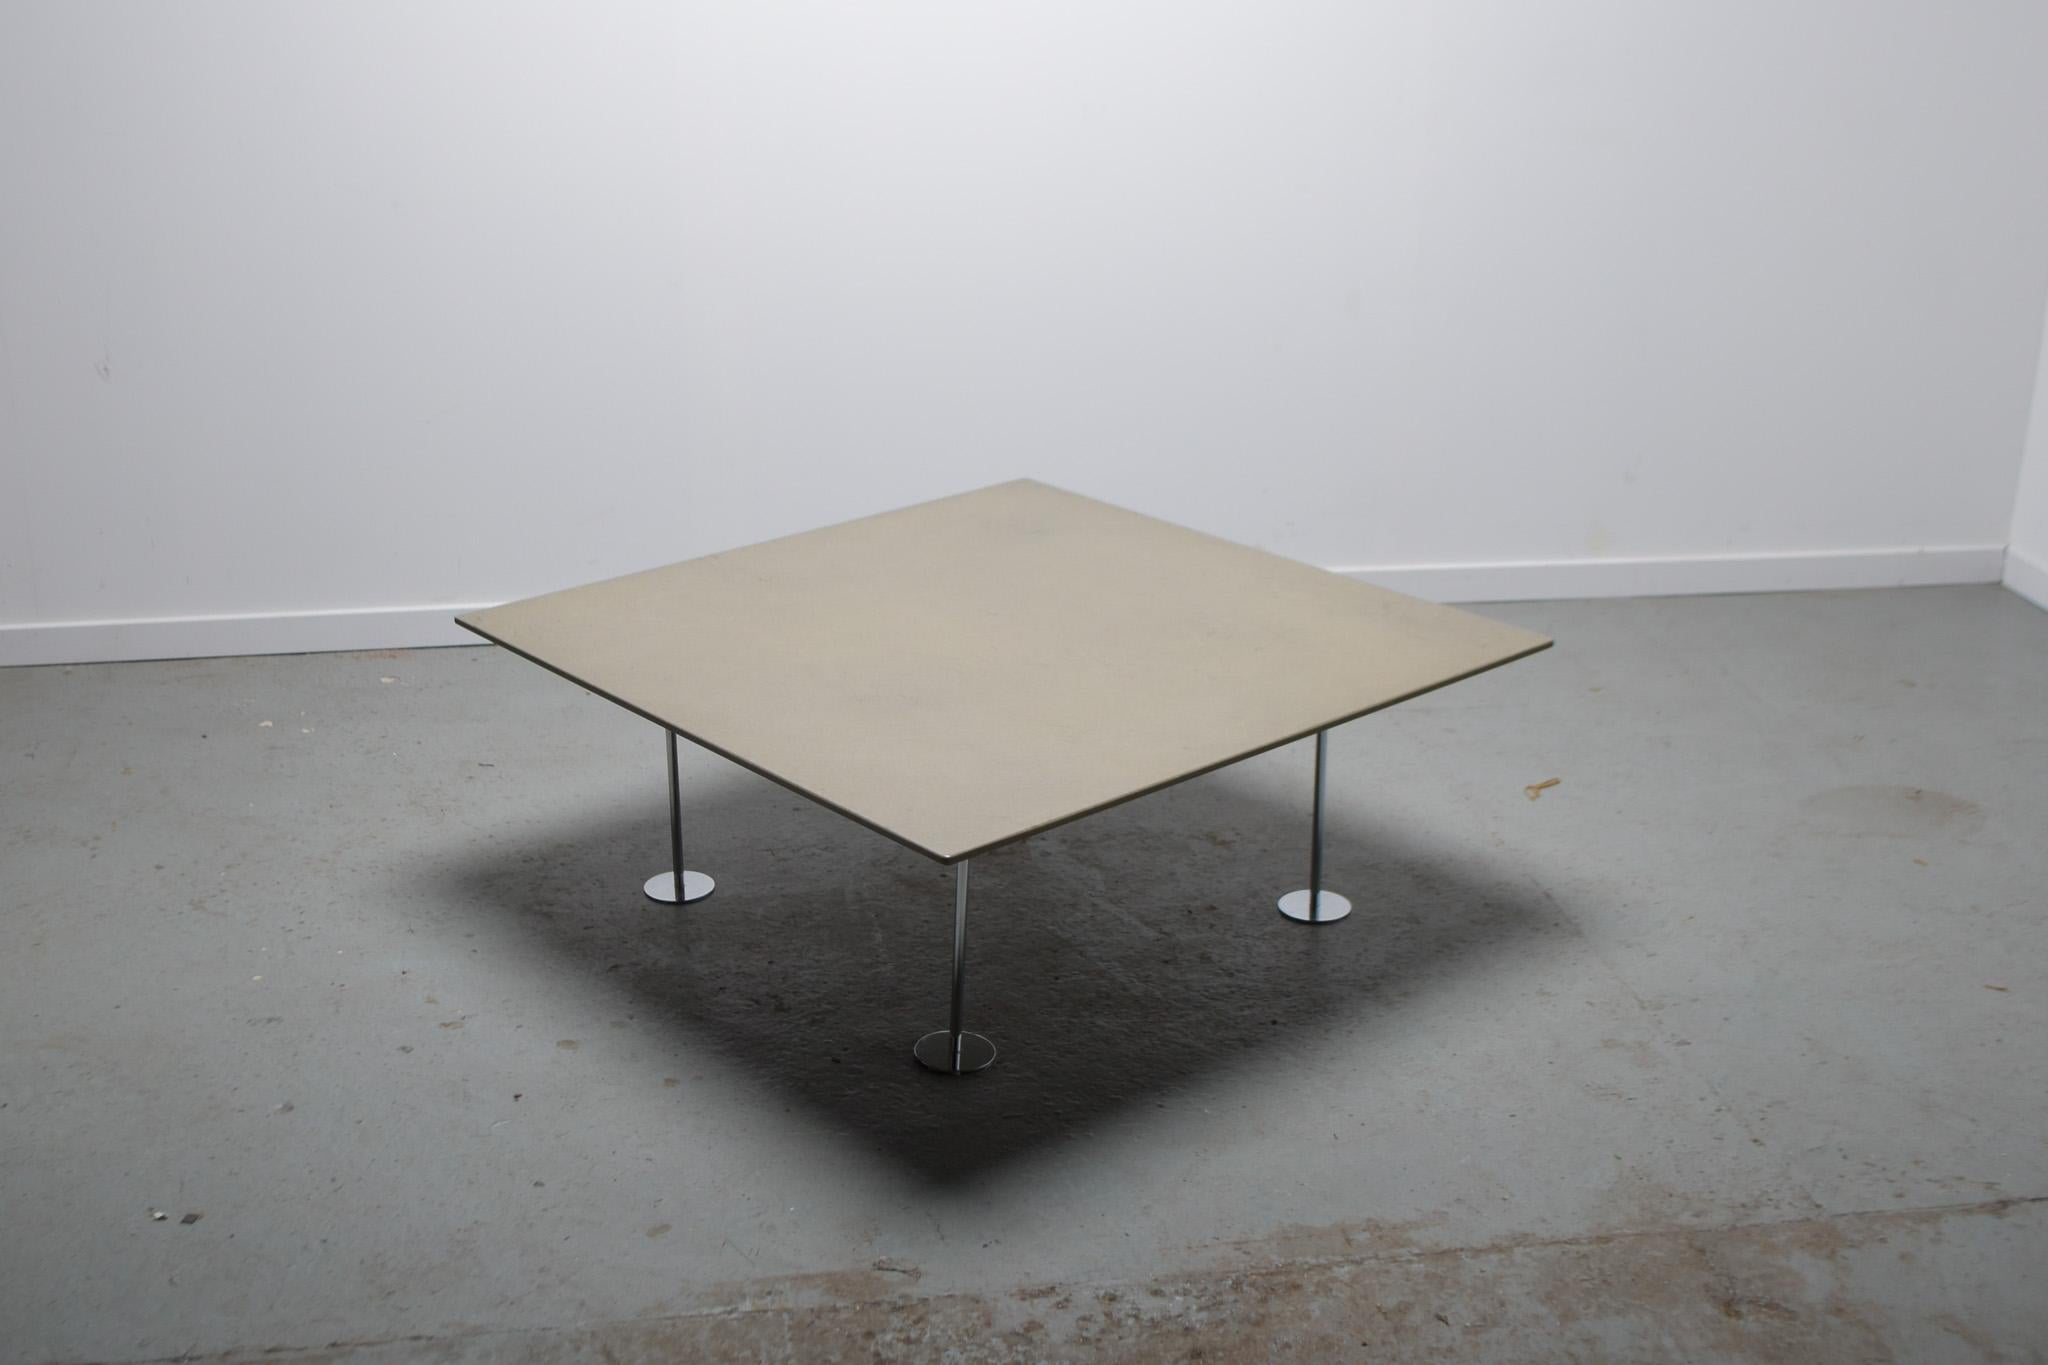 Platos coffee table mde from polished stone with chromle legs. 

The table was purchased from the we renowned design furniture shop; Dominique Rigo in Brussels in 1988. 

We have the original invoice. The table is in nearly perfect condition.